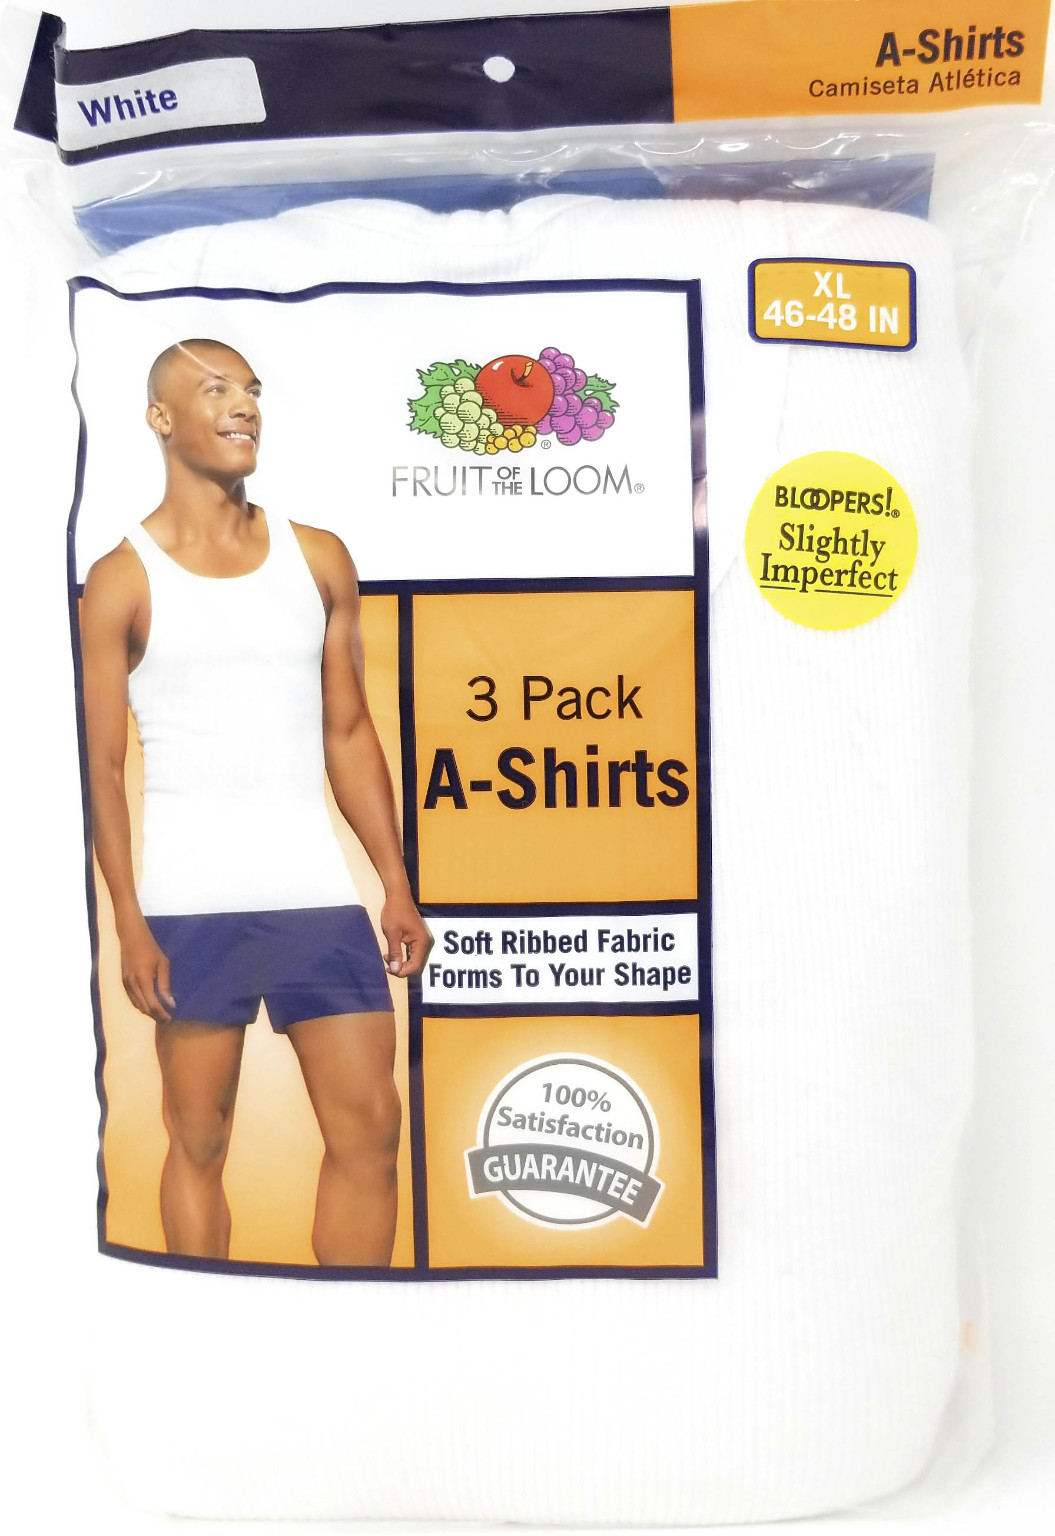 Fruit of the Loom Men's Irregular Ribbed A-Shirts - White, S - XL, 3 pack